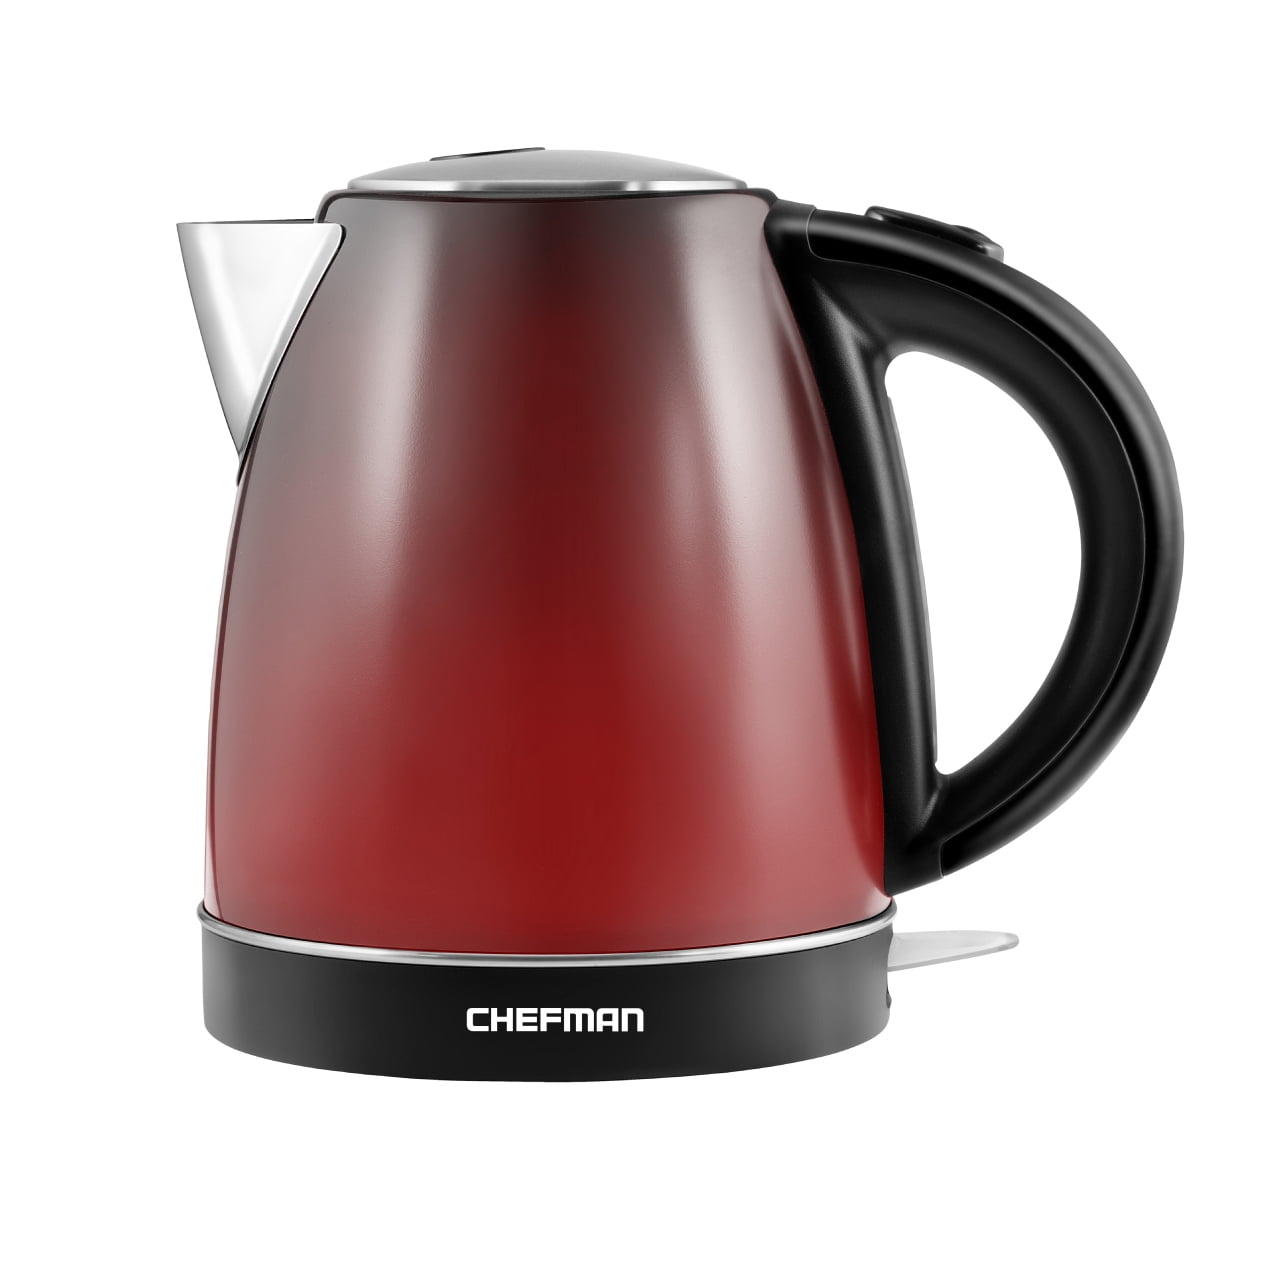 Longdeem Retro Electric Kettle, 1500W, Stainless Steel, Auto Shut Off, 1.7L, Red K3041 Red